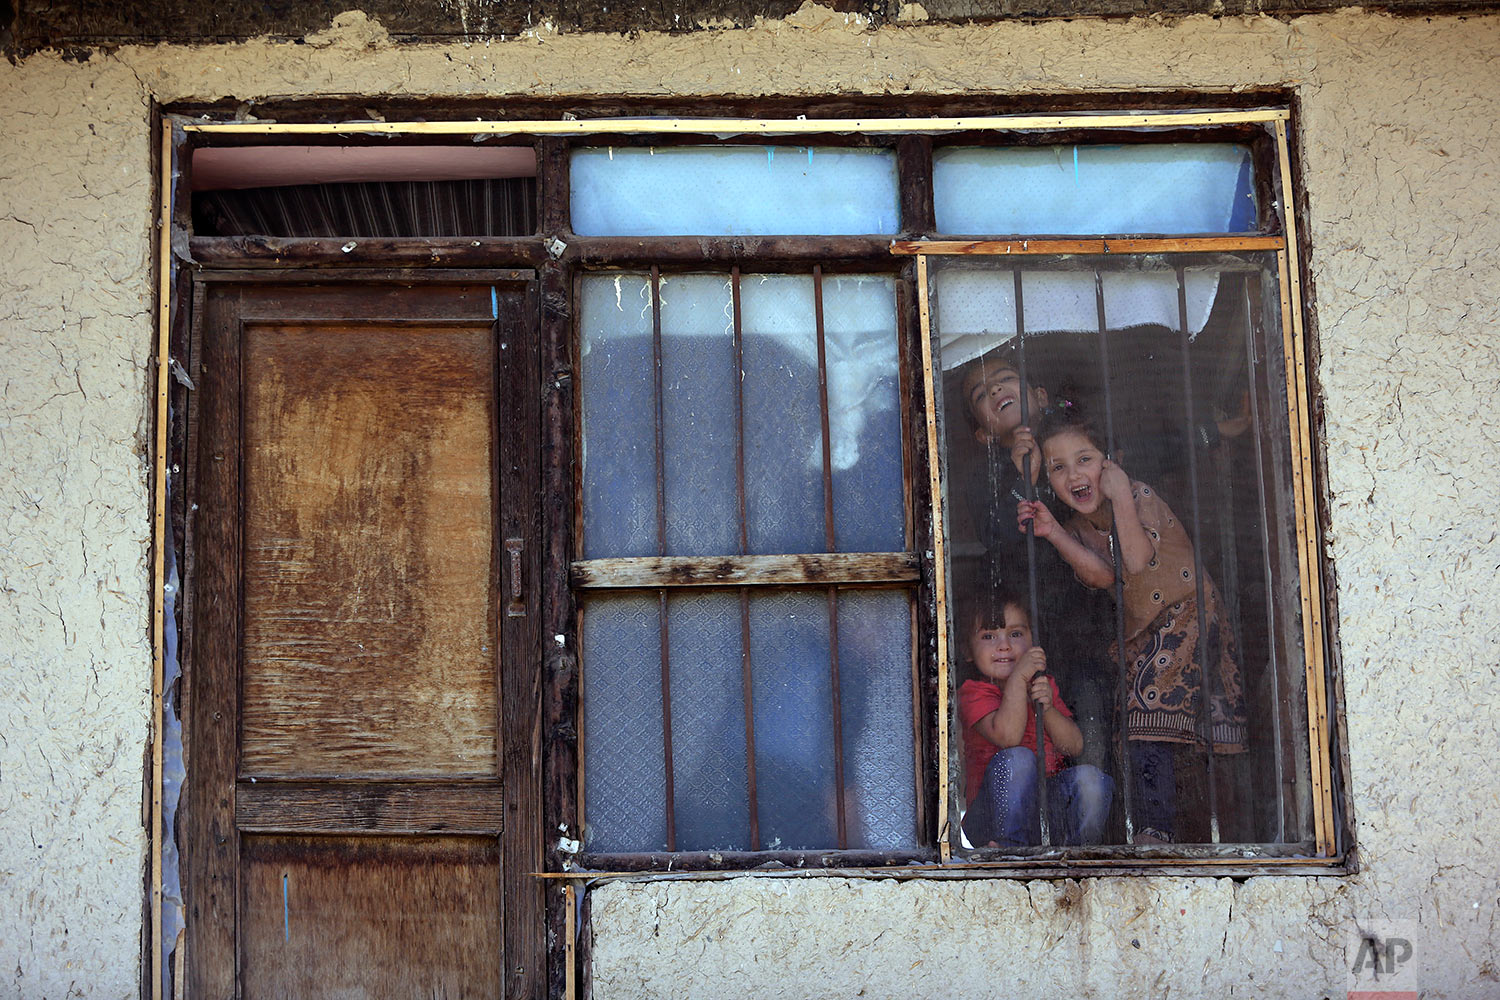  Afghan children look outside through the window of their home as they poses for photograph in the old part of Kabul, Afghanistan, Tuesday, Sept. 26, 2017. (AP Photo/Rahmat Gul) 